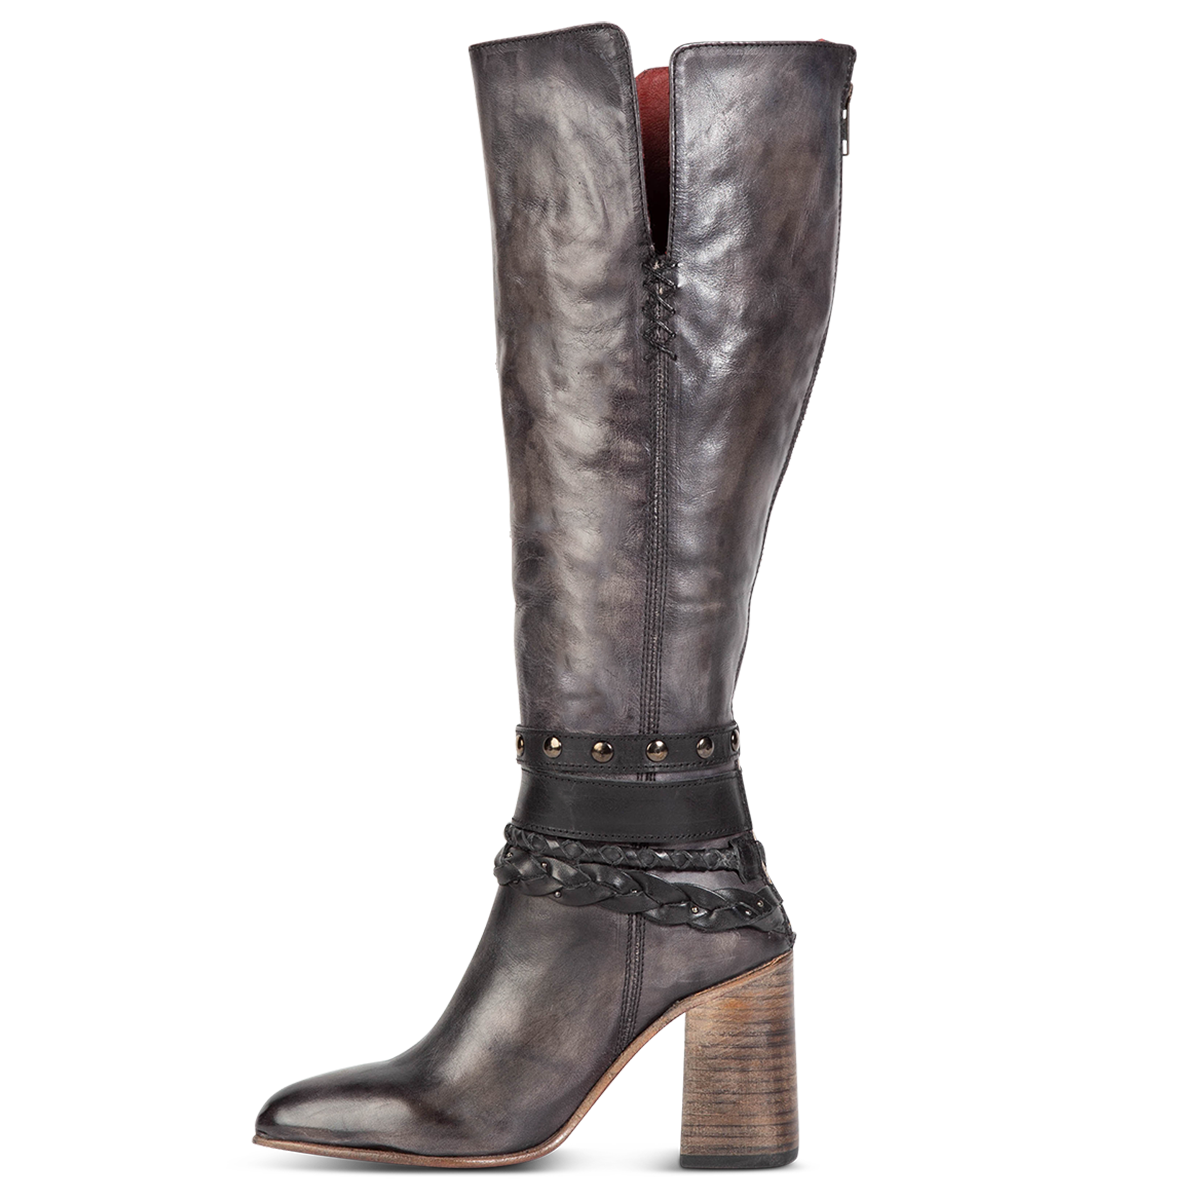 Inside view showing stacked heel, braided and studded ankle strap detailing, and side slits on FREEBIRD women's Juniper black heeled boot